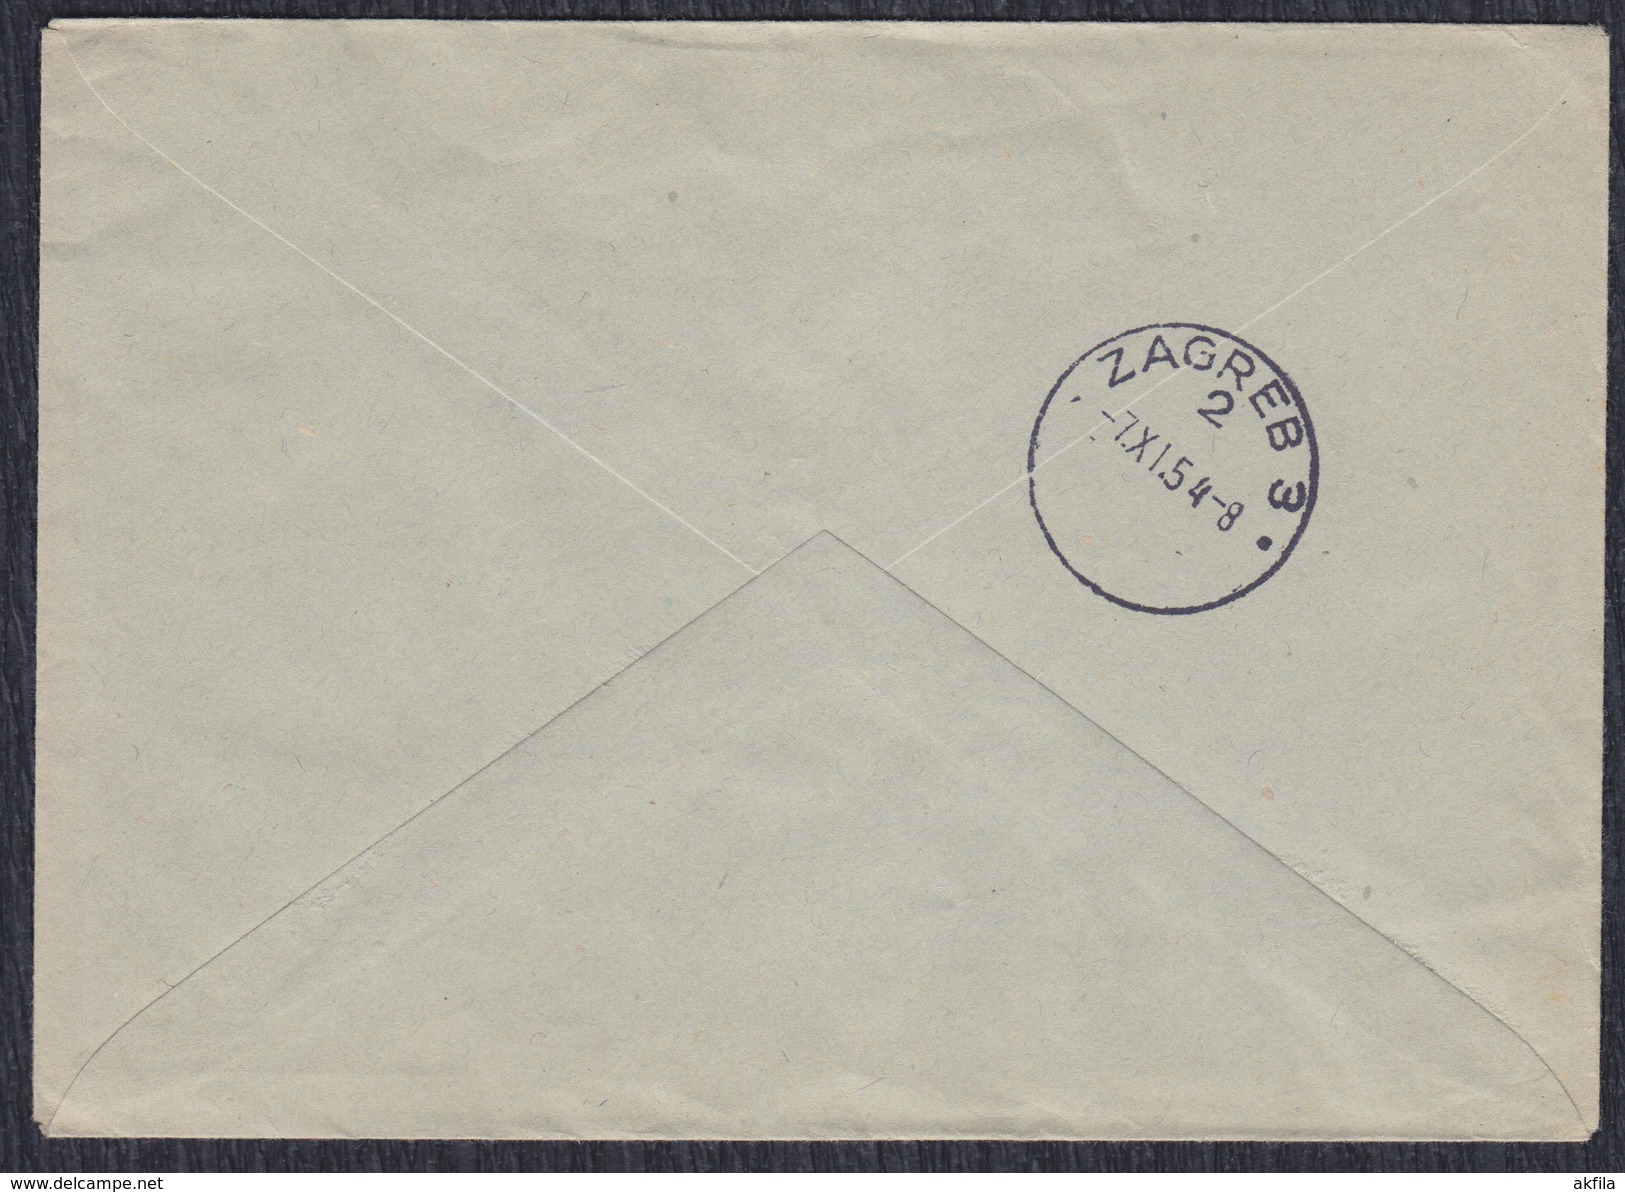 Yugoslavia 1954 Registered Letter With Red Cross Surcharge Stamp Sent From Zupanja To Zagreb - Covers & Documents